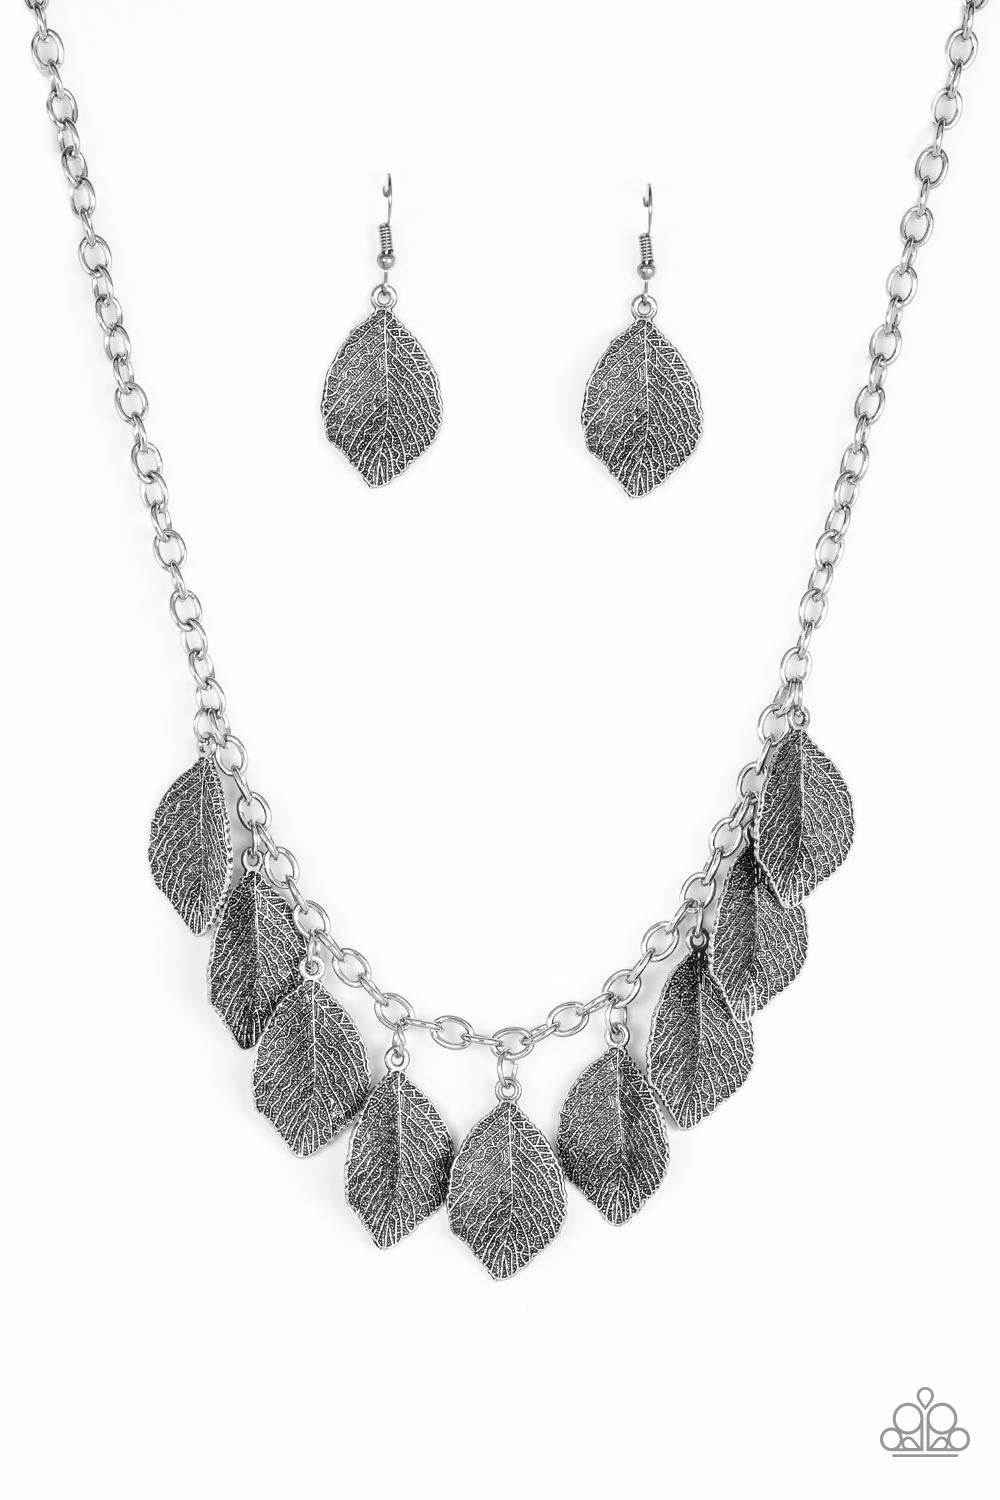 shop-sassy-affordable- a-true-be-leaf-er-silver-paparazzi-accessories